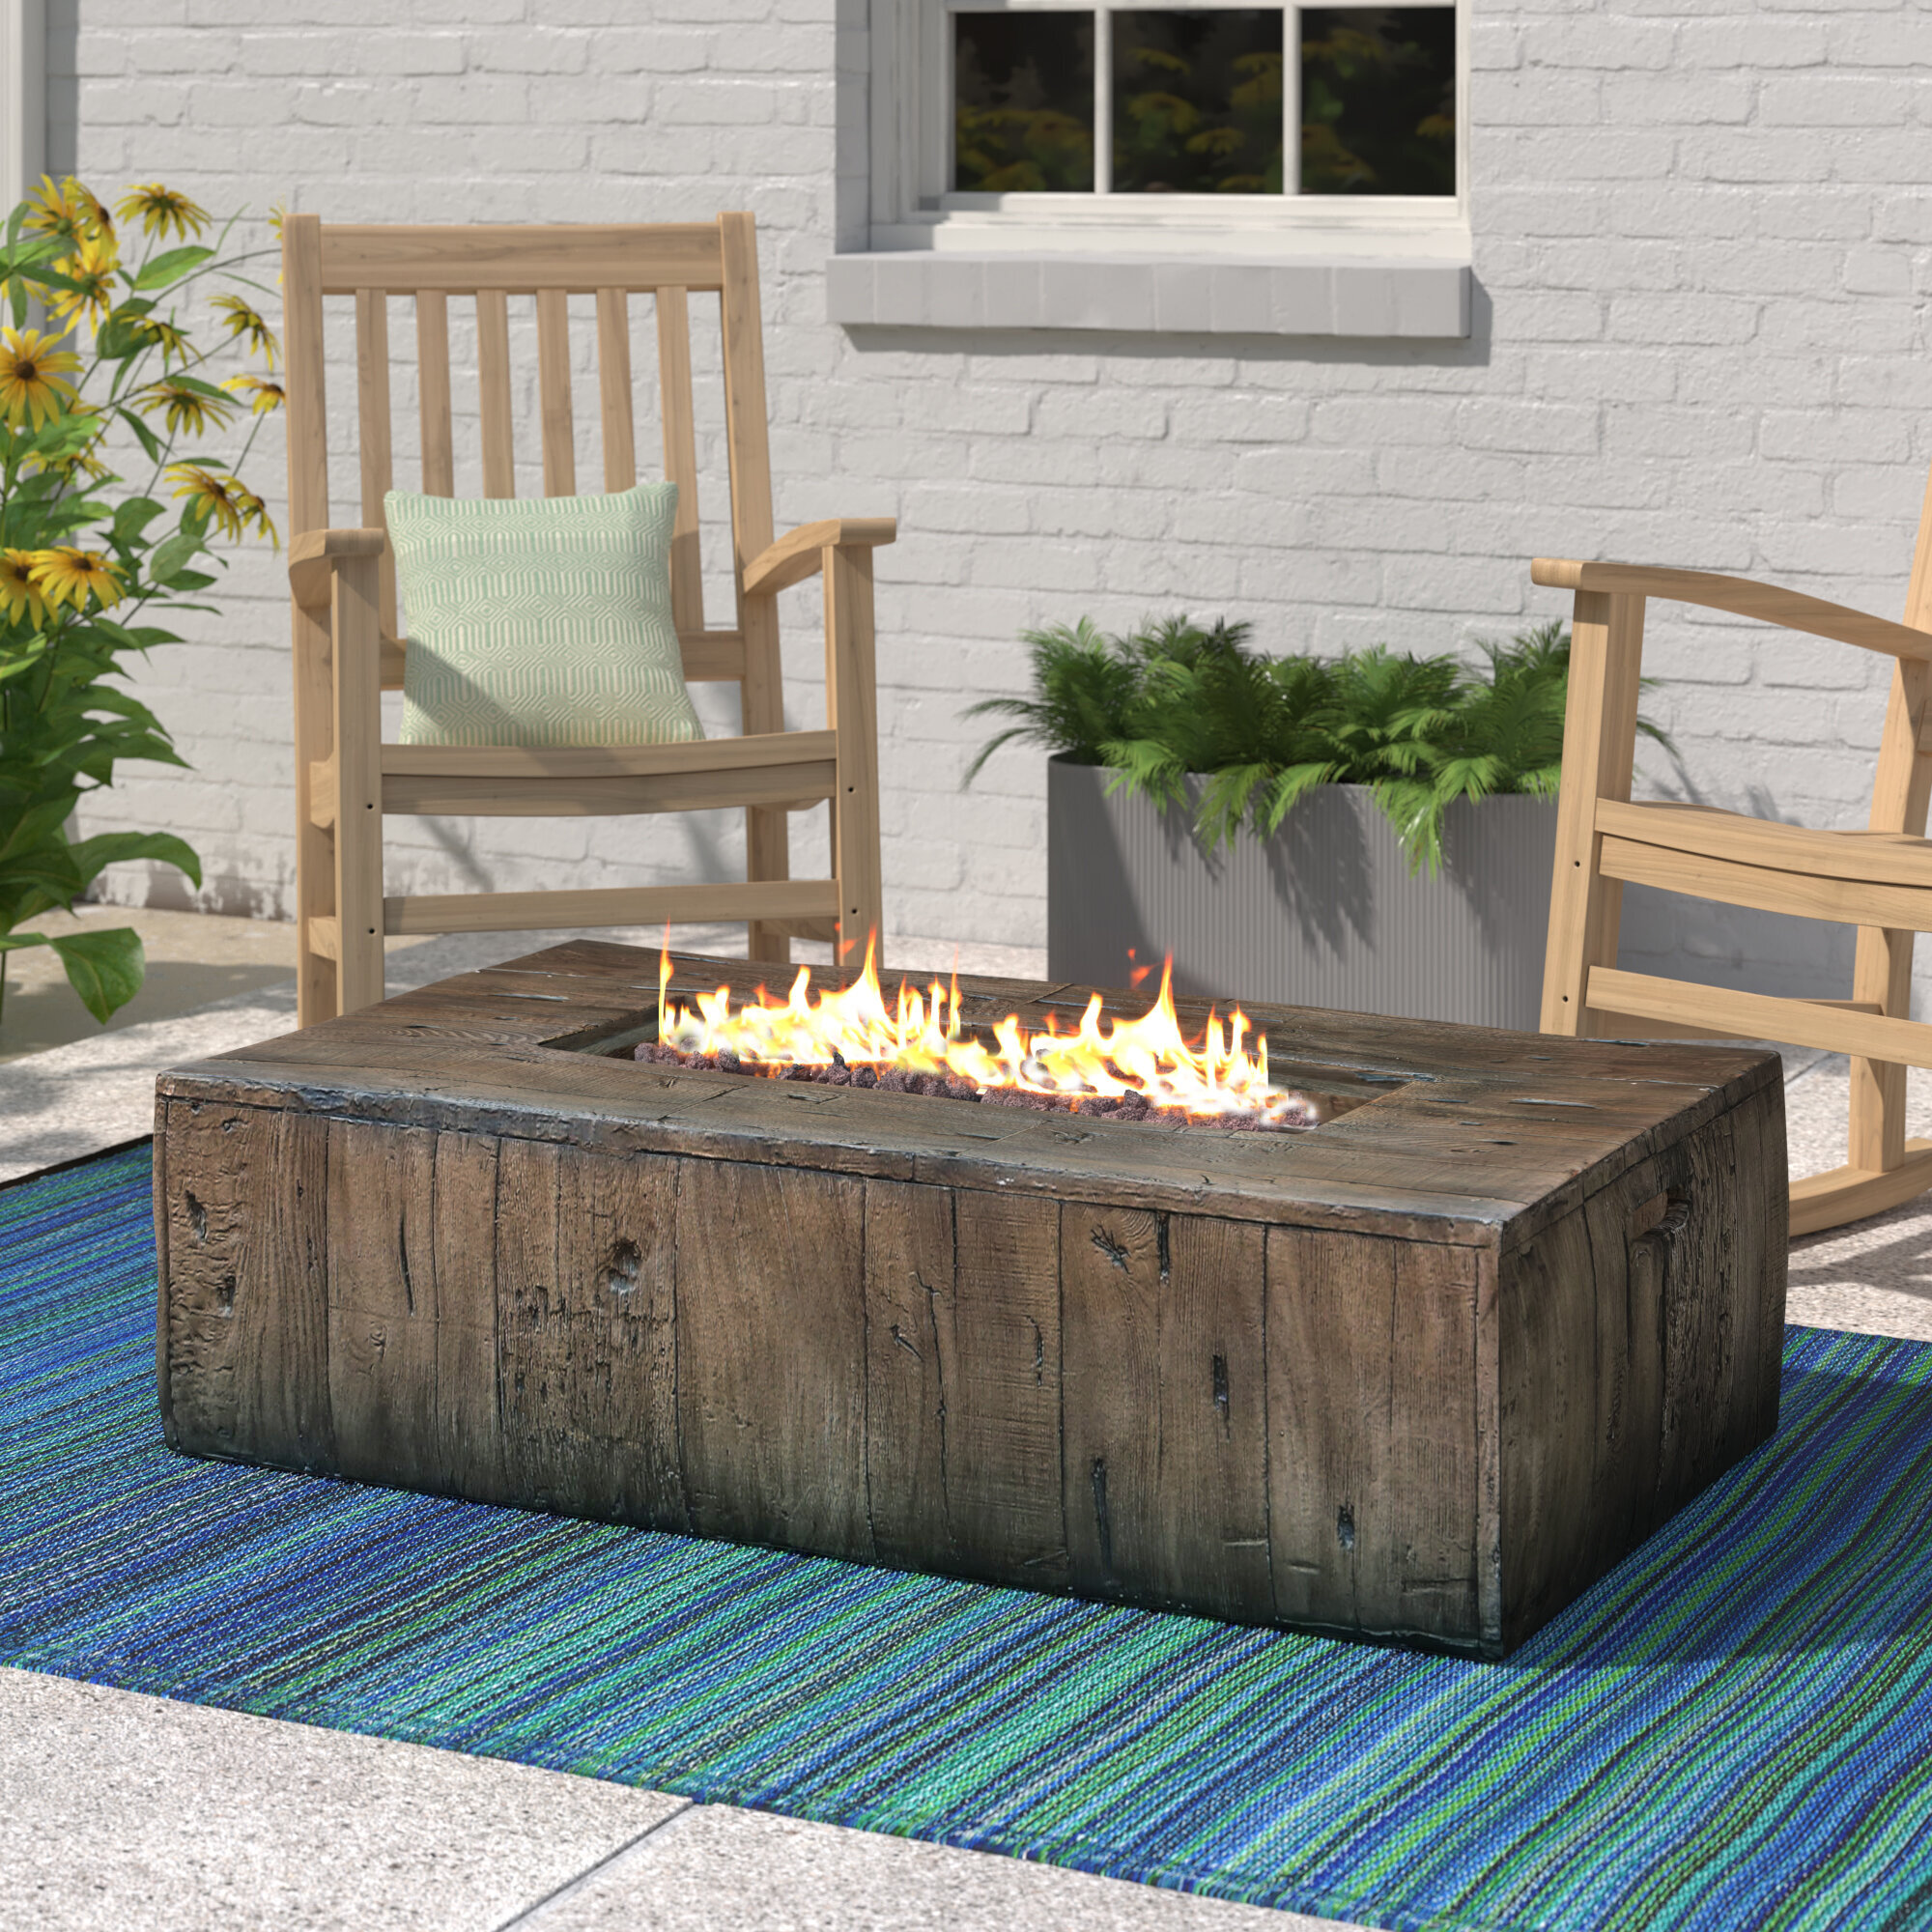 Sunnydaze Rustic Faux Wood Outdoor Propane Gas Fire Pit Coffee